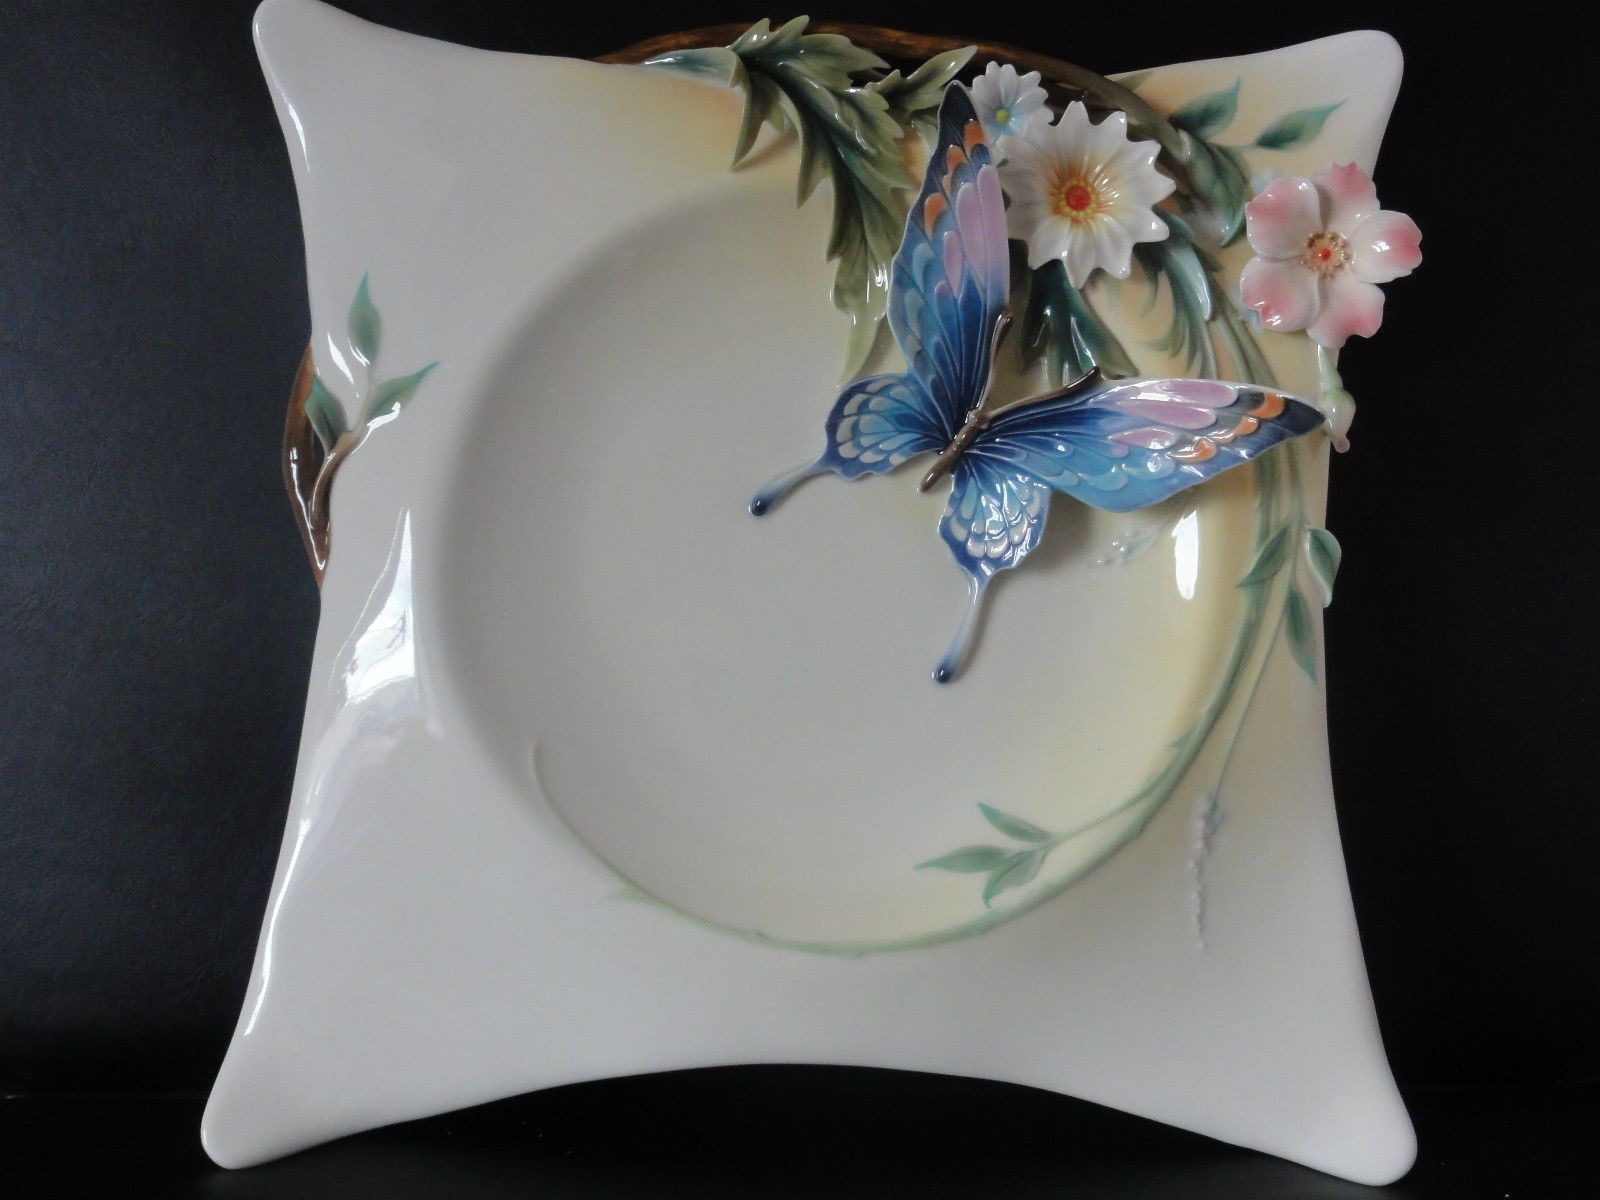 14 Best Franz Porcelain butterfly Vase 2024 free download franz porcelain butterfly vase of franz porcelain large limited edition butterfly tray fz01488 bnib in franz porcelain large limited edition butterfly tray fz01488 bnib